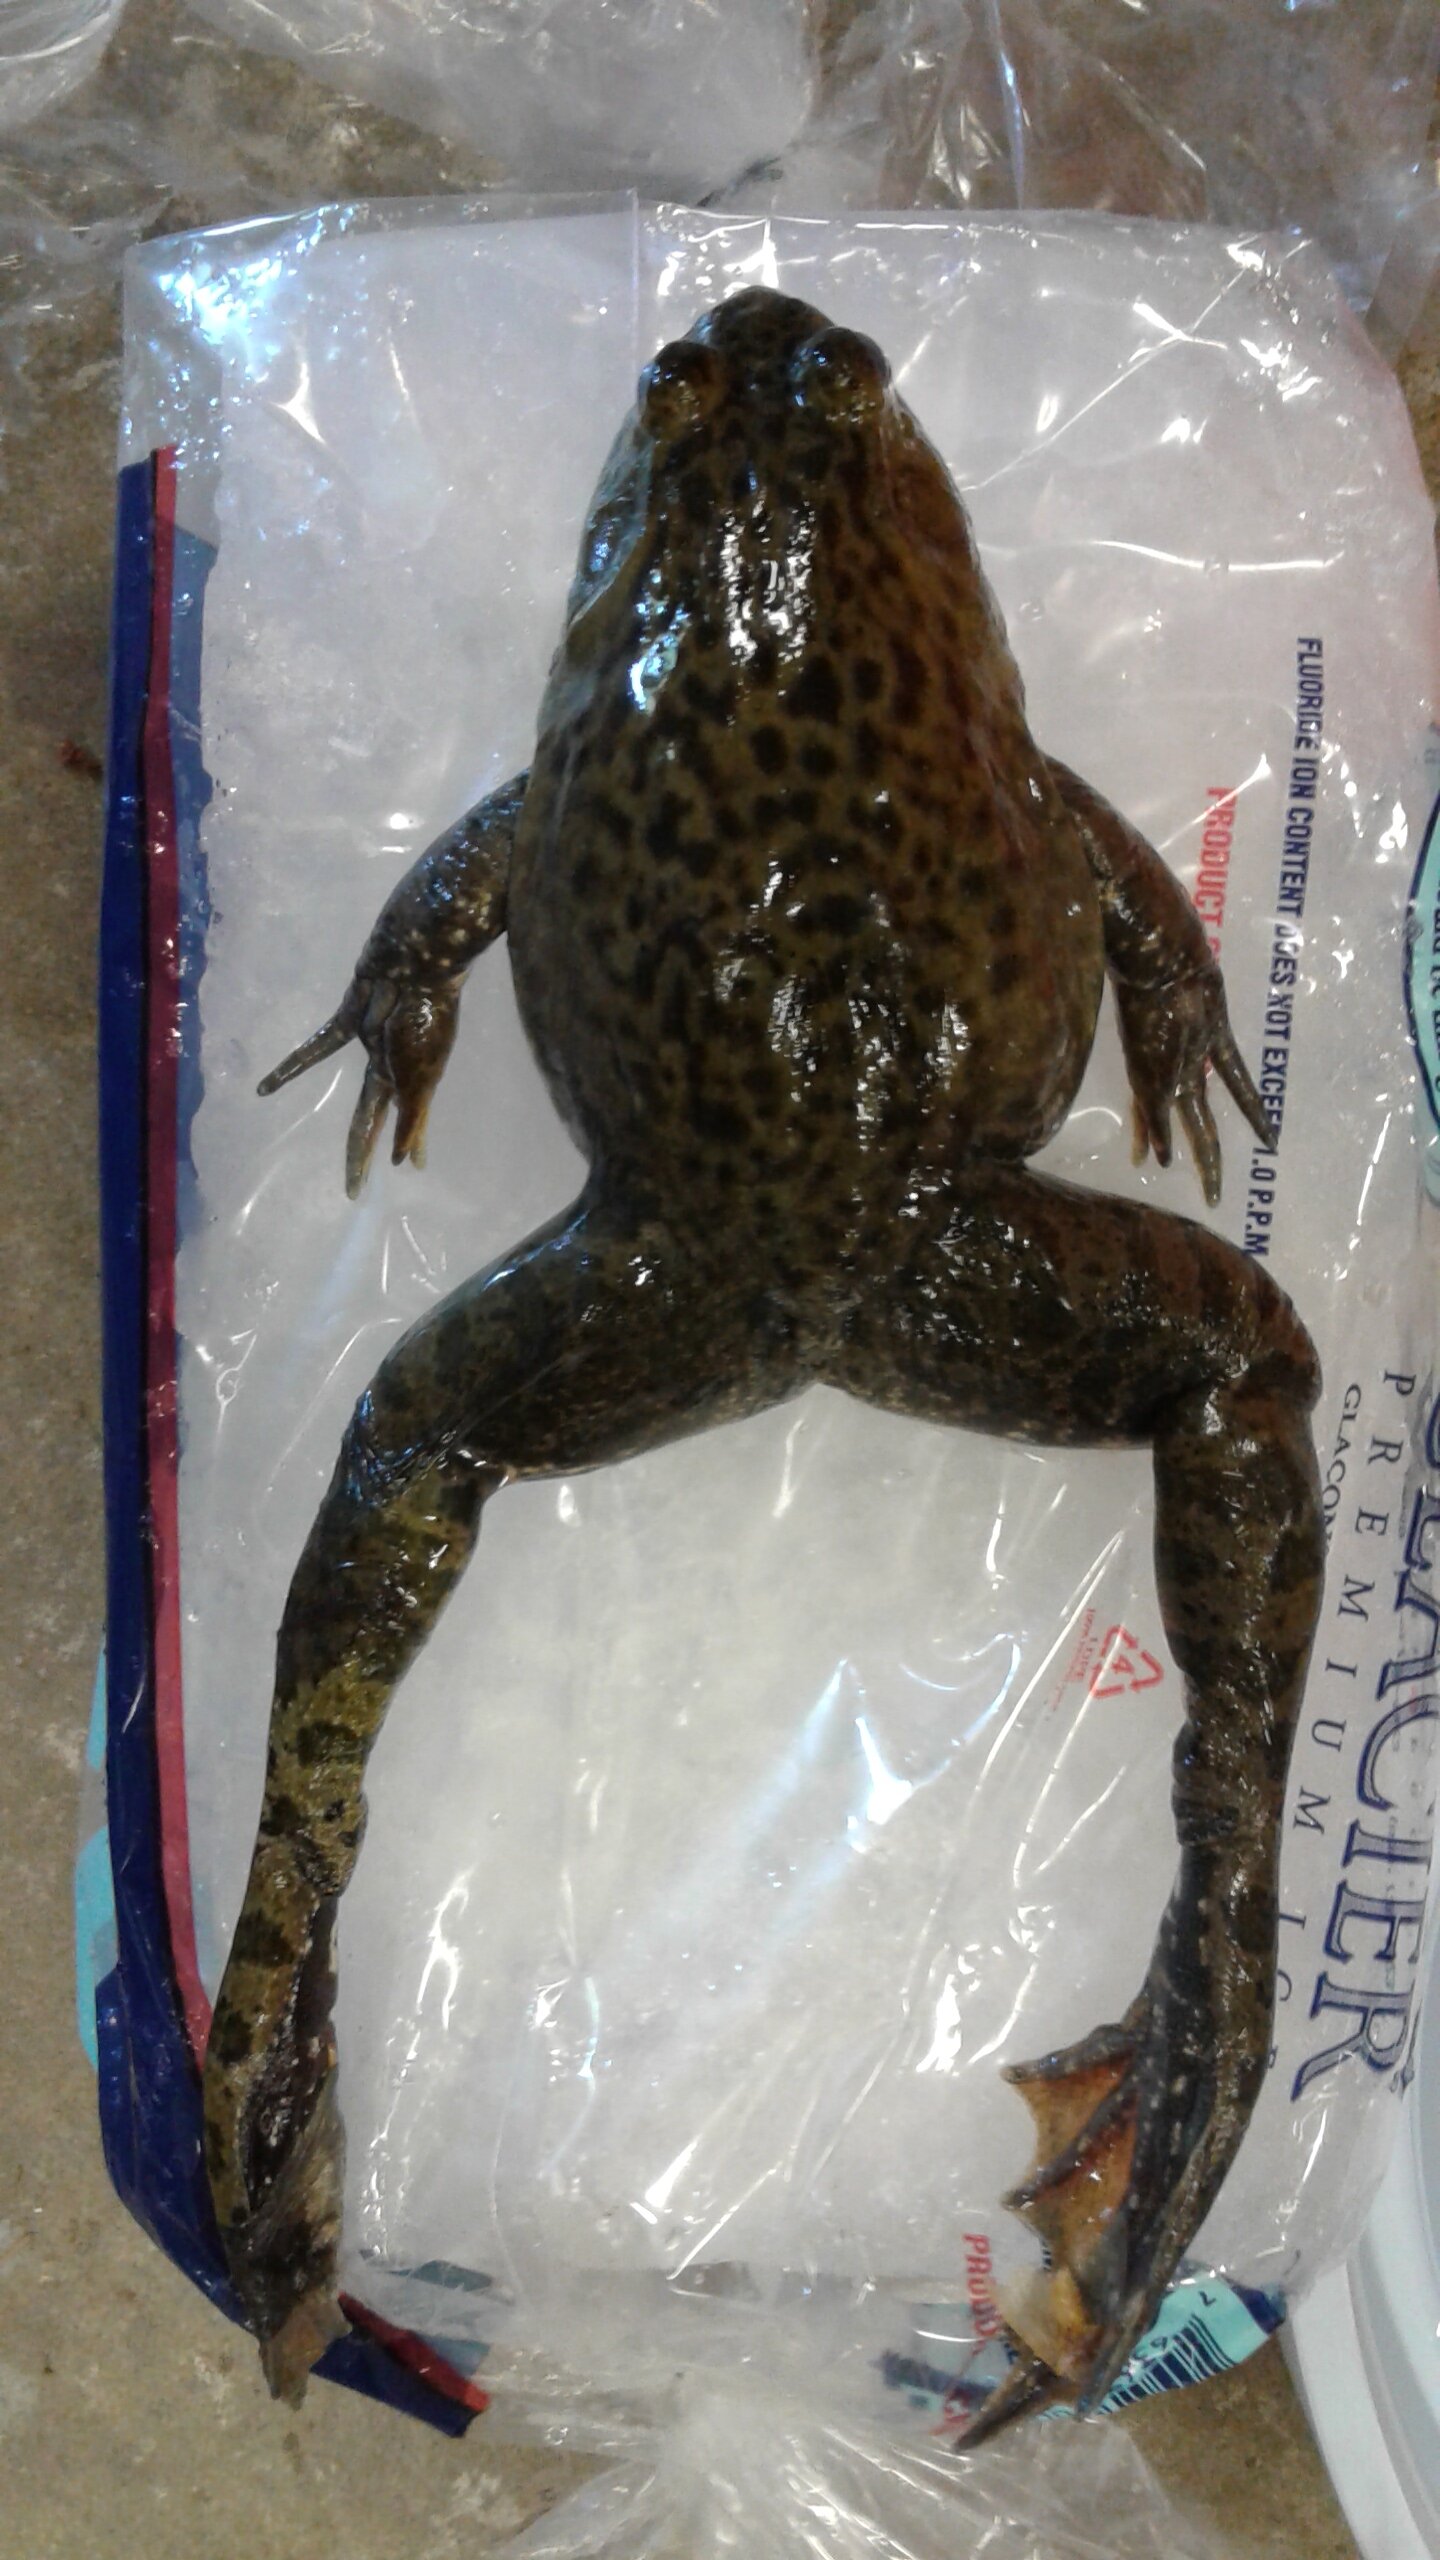 The Bullfrog Action Time is in full swing this summer to combat the American  bullfrog invasion in Creston. - CKISS - Central Kootenay Invasive Species  Society